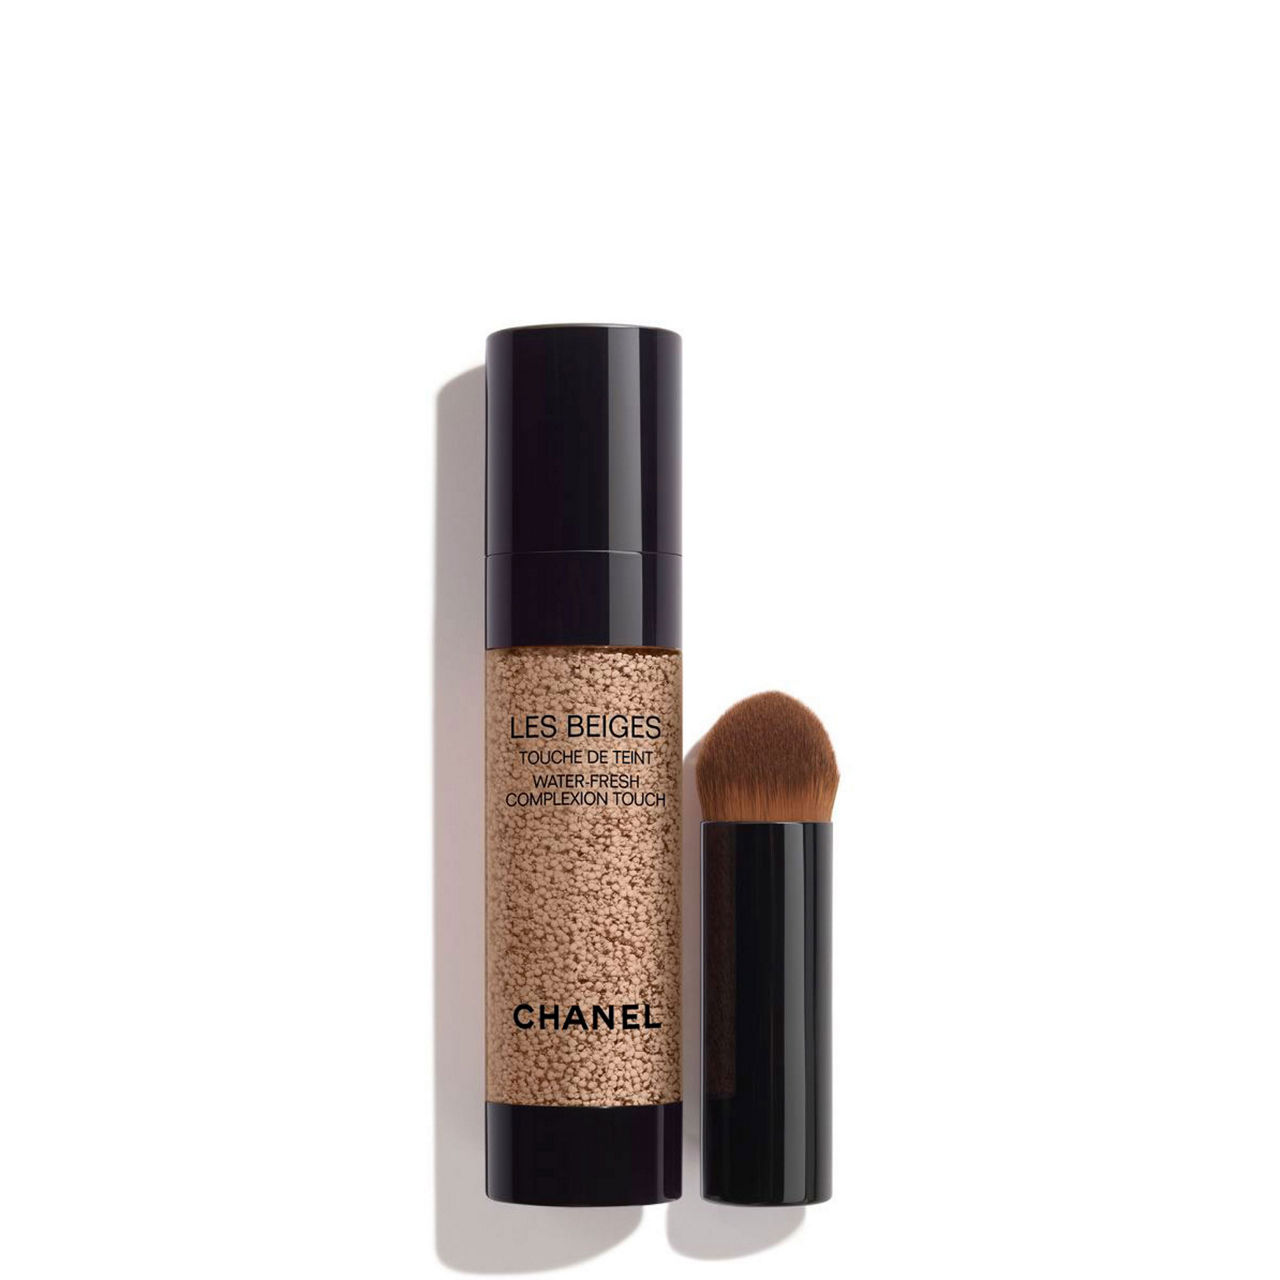 Foundation 411: New CHANEL Les Beiges Healthy Glow Gel Touch